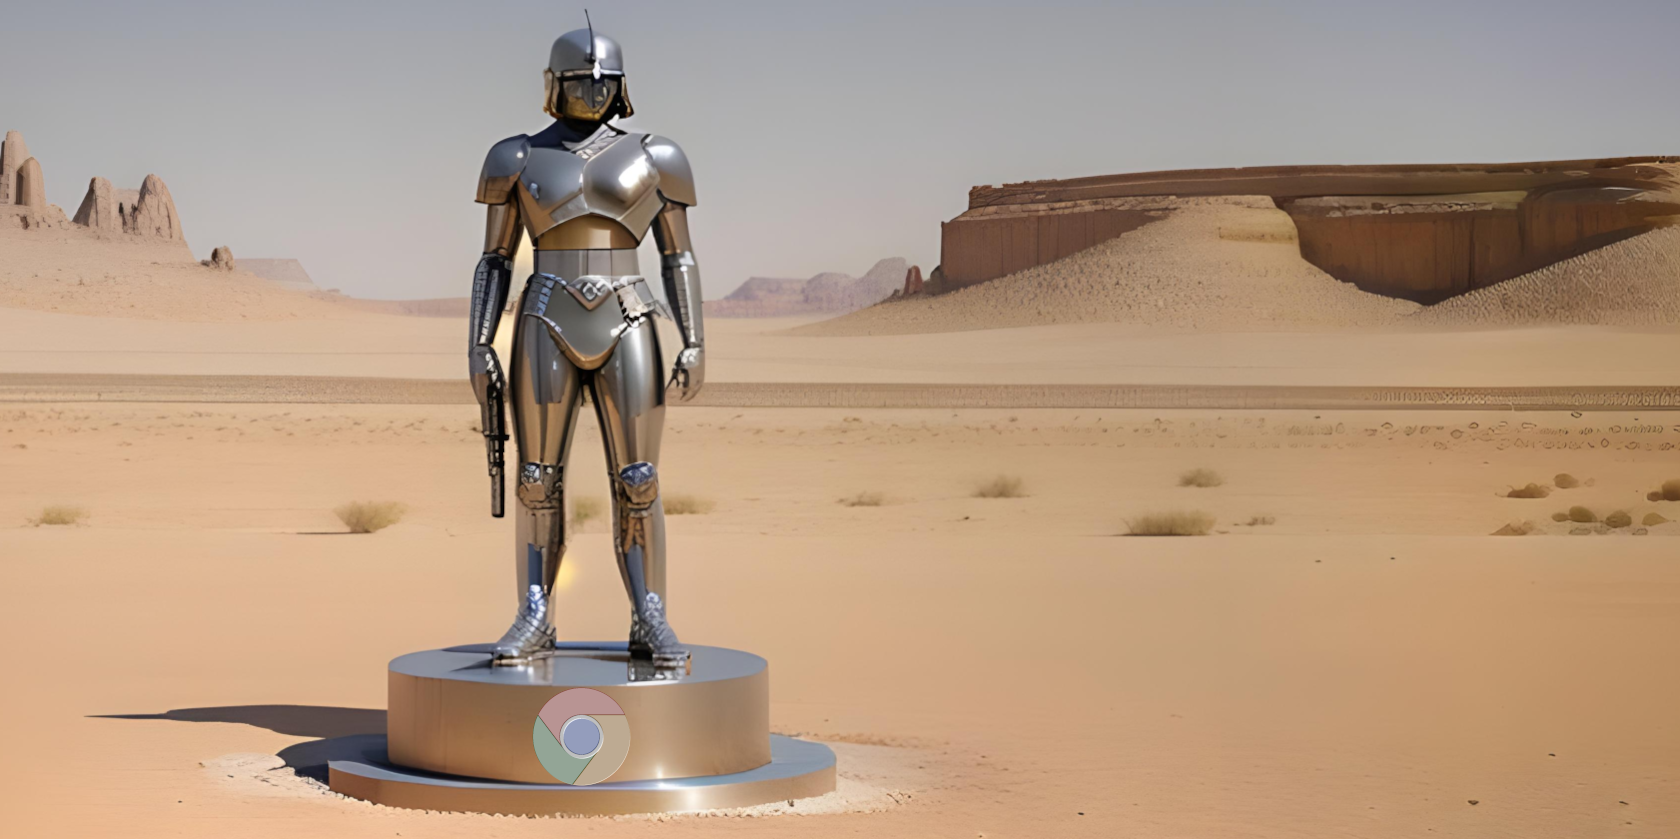 A Chrome statue with a gun and the Google Chrome emblem embossed on the base. Standing in a desert